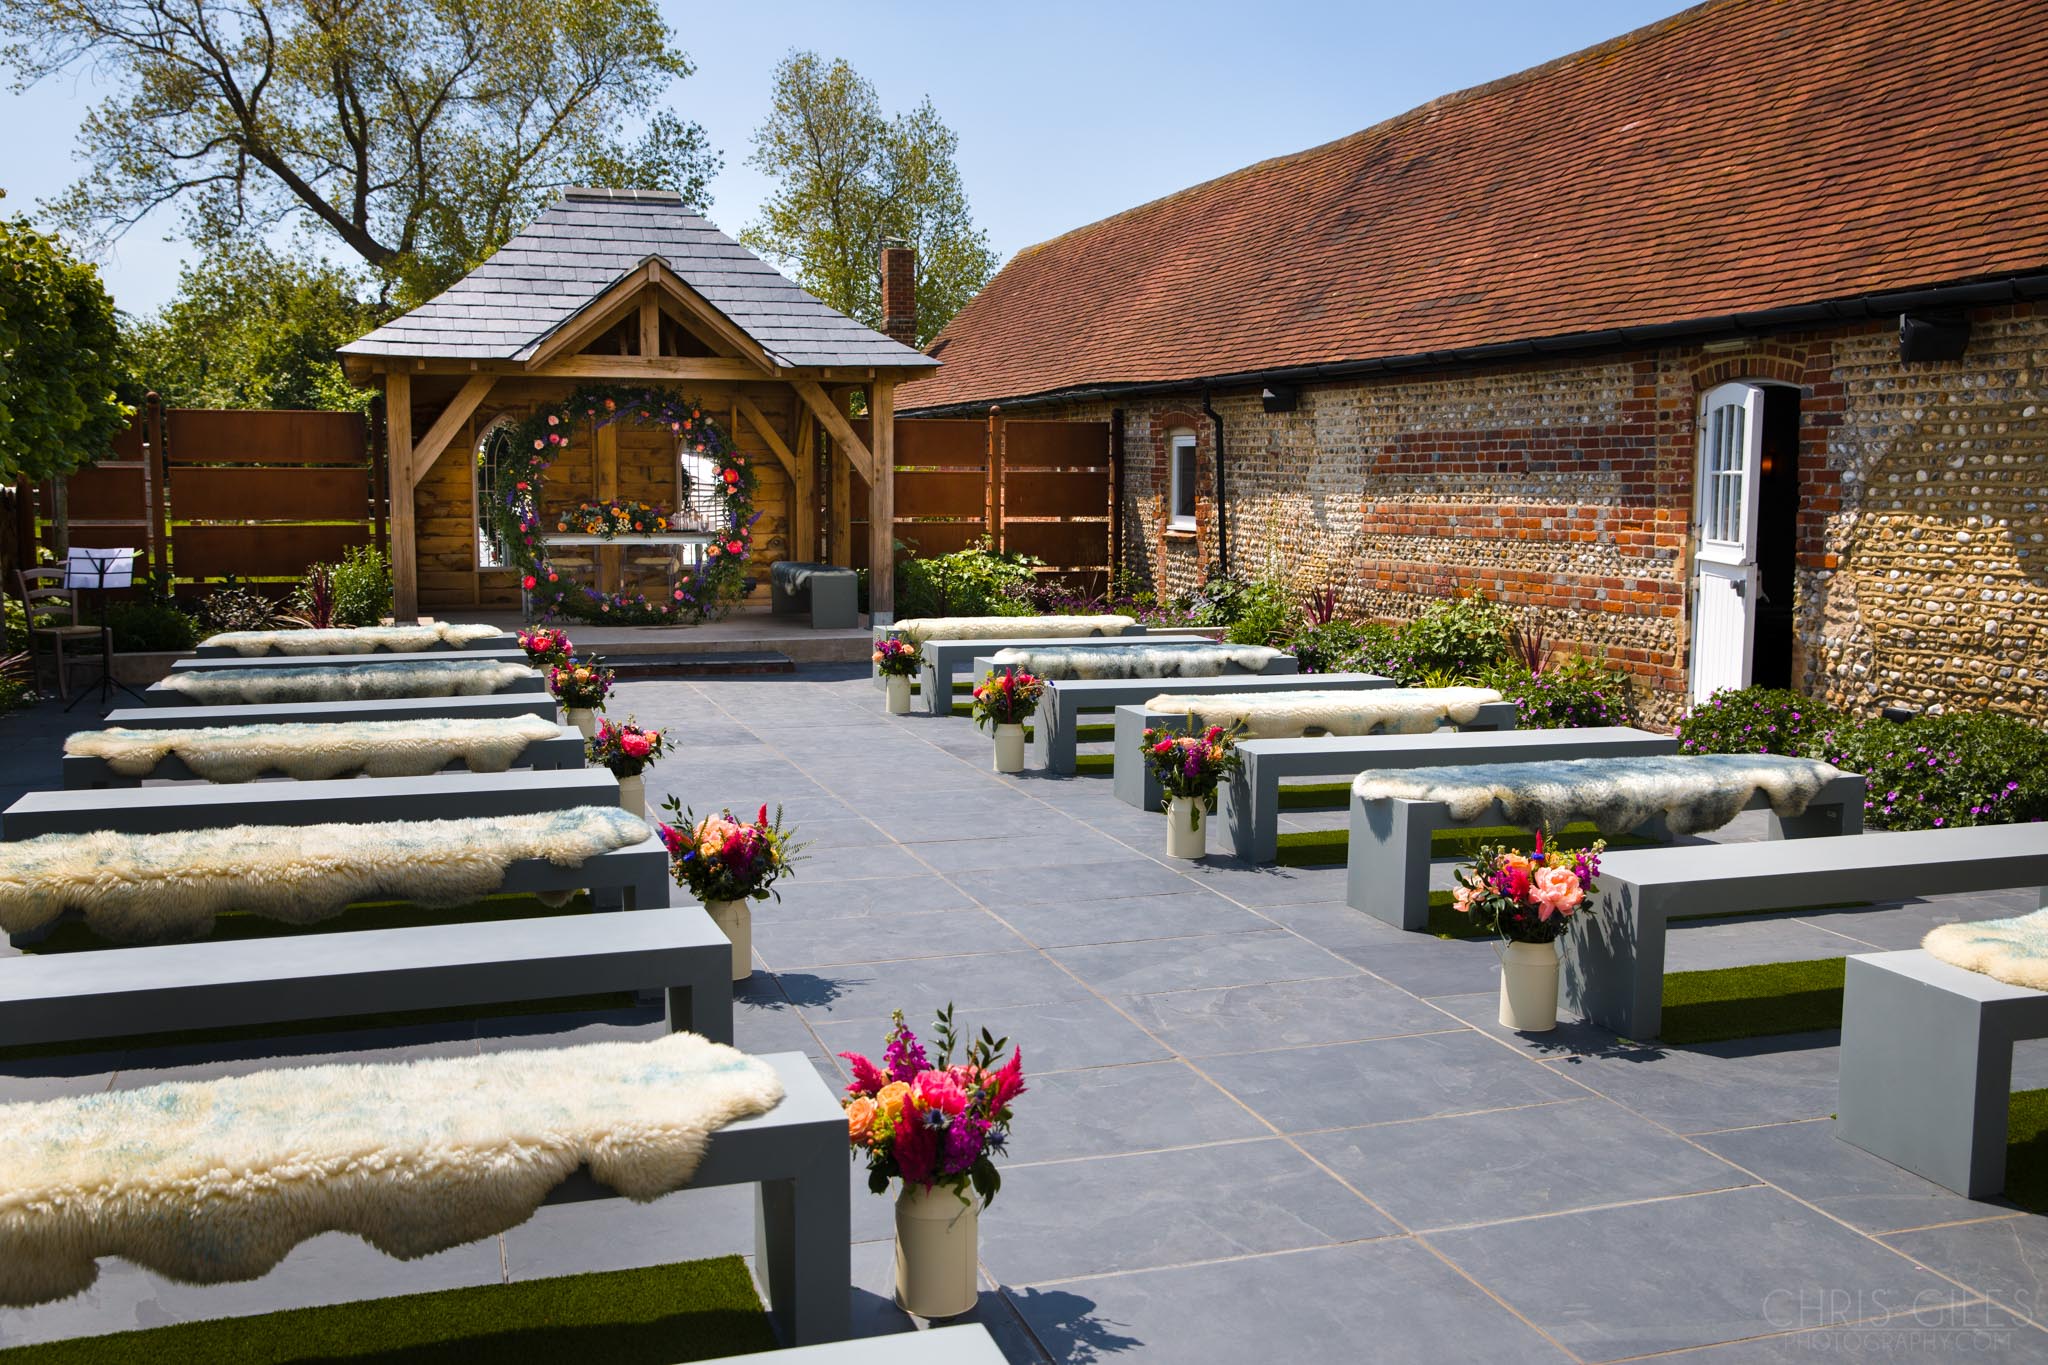 The outdoor ceremony area at Southend Barns